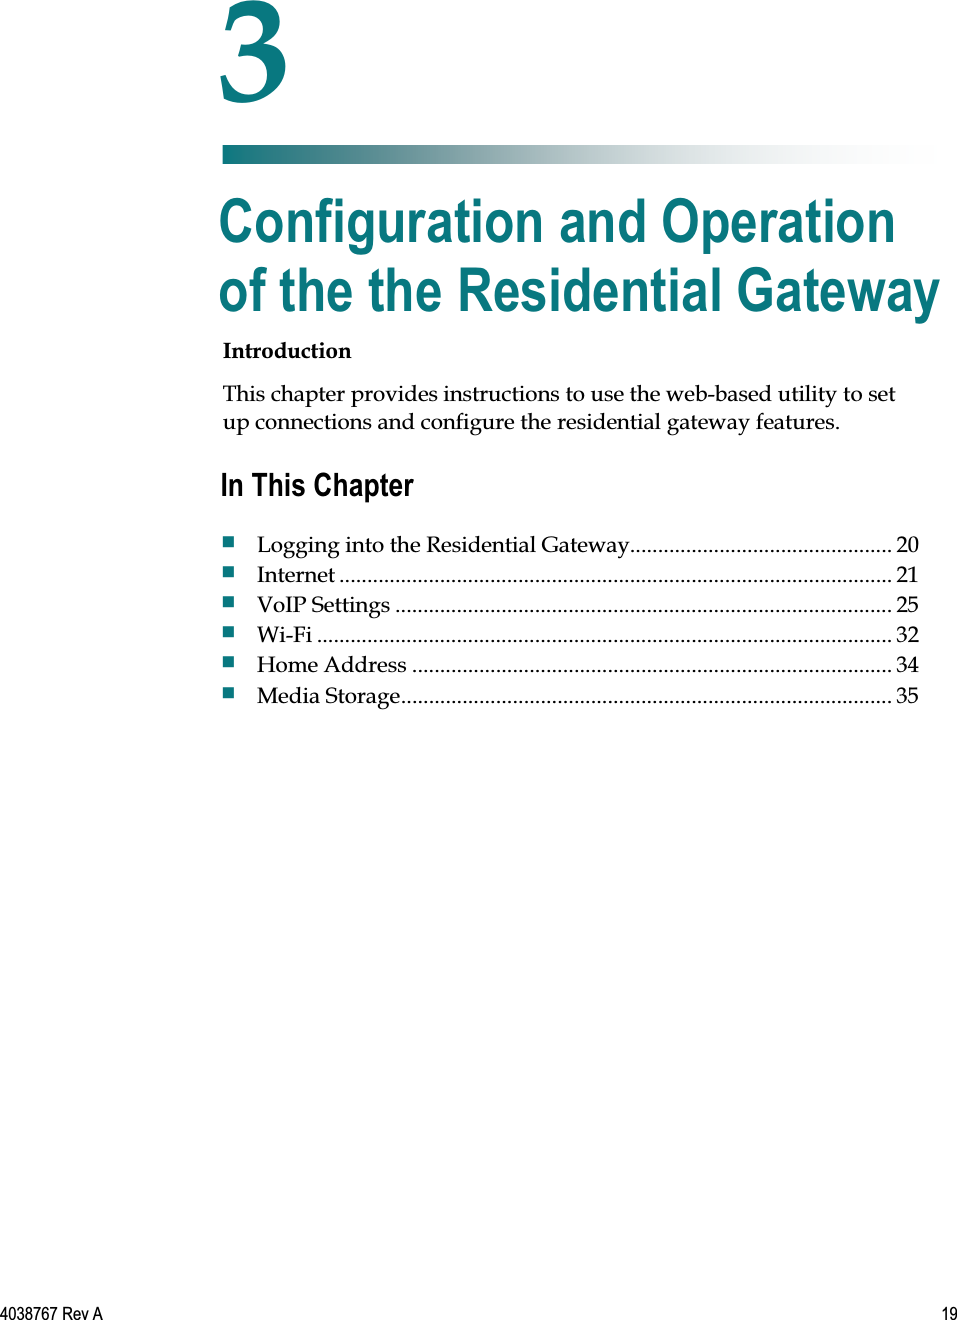   4038767 Rev A  19  Introduction This chapter provides instructions to use the web-based utility to set up connections and configure the residential gateway features.    3 Chapter 3 Configuration and Operation of the the Residential Gateway In This Chapter  Logging into the Residential Gateway............................................... 20  Internet ................................................................................................... 21  VoIP Settings ......................................................................................... 25  Wi-Fi ....................................................................................................... 32  Home Address ...................................................................................... 34  Media Storage ........................................................................................ 35 